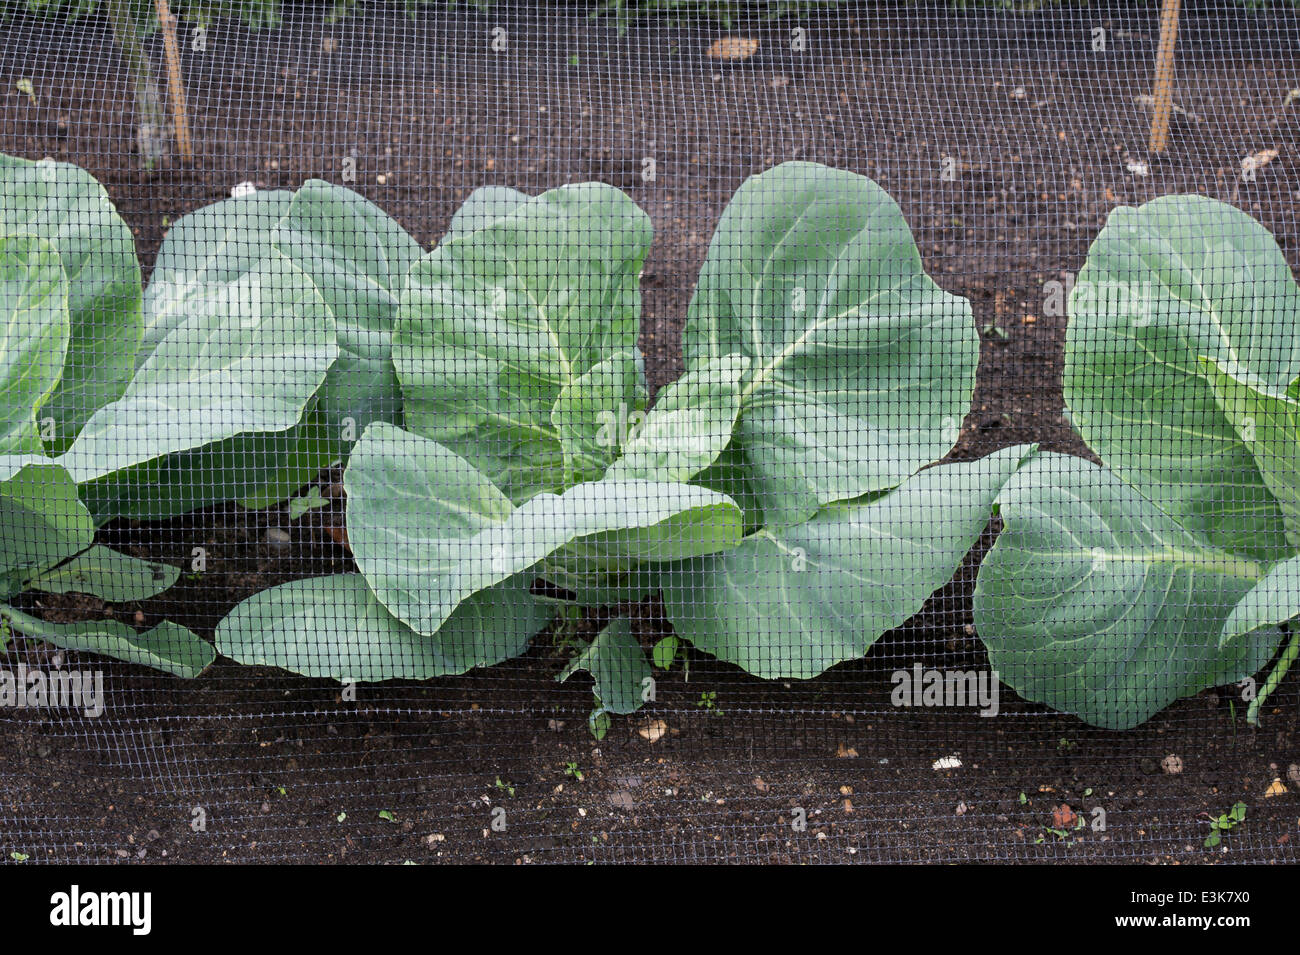 Brassica oleracea. Oxheart cabbages under netting in a vegetable garden Stock Photo